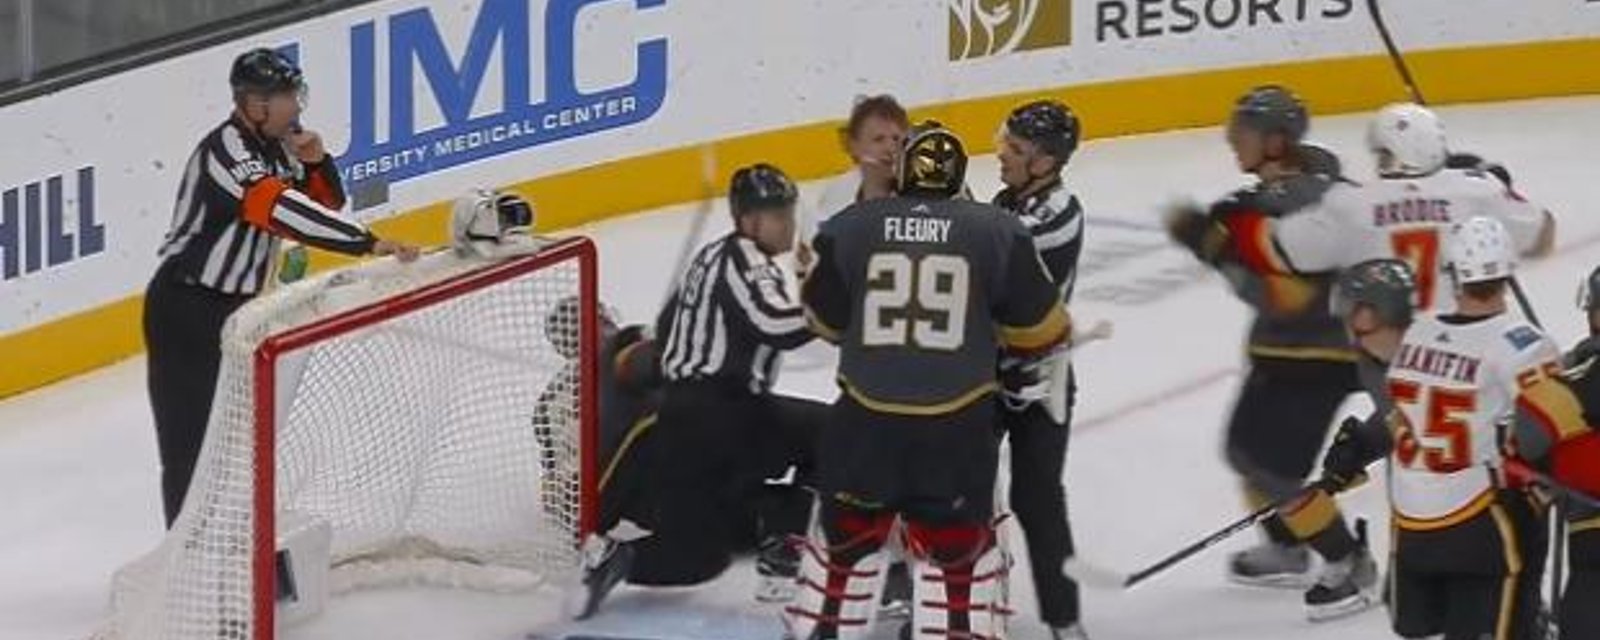 Fleury challenges Rittich to a goalie fight! 